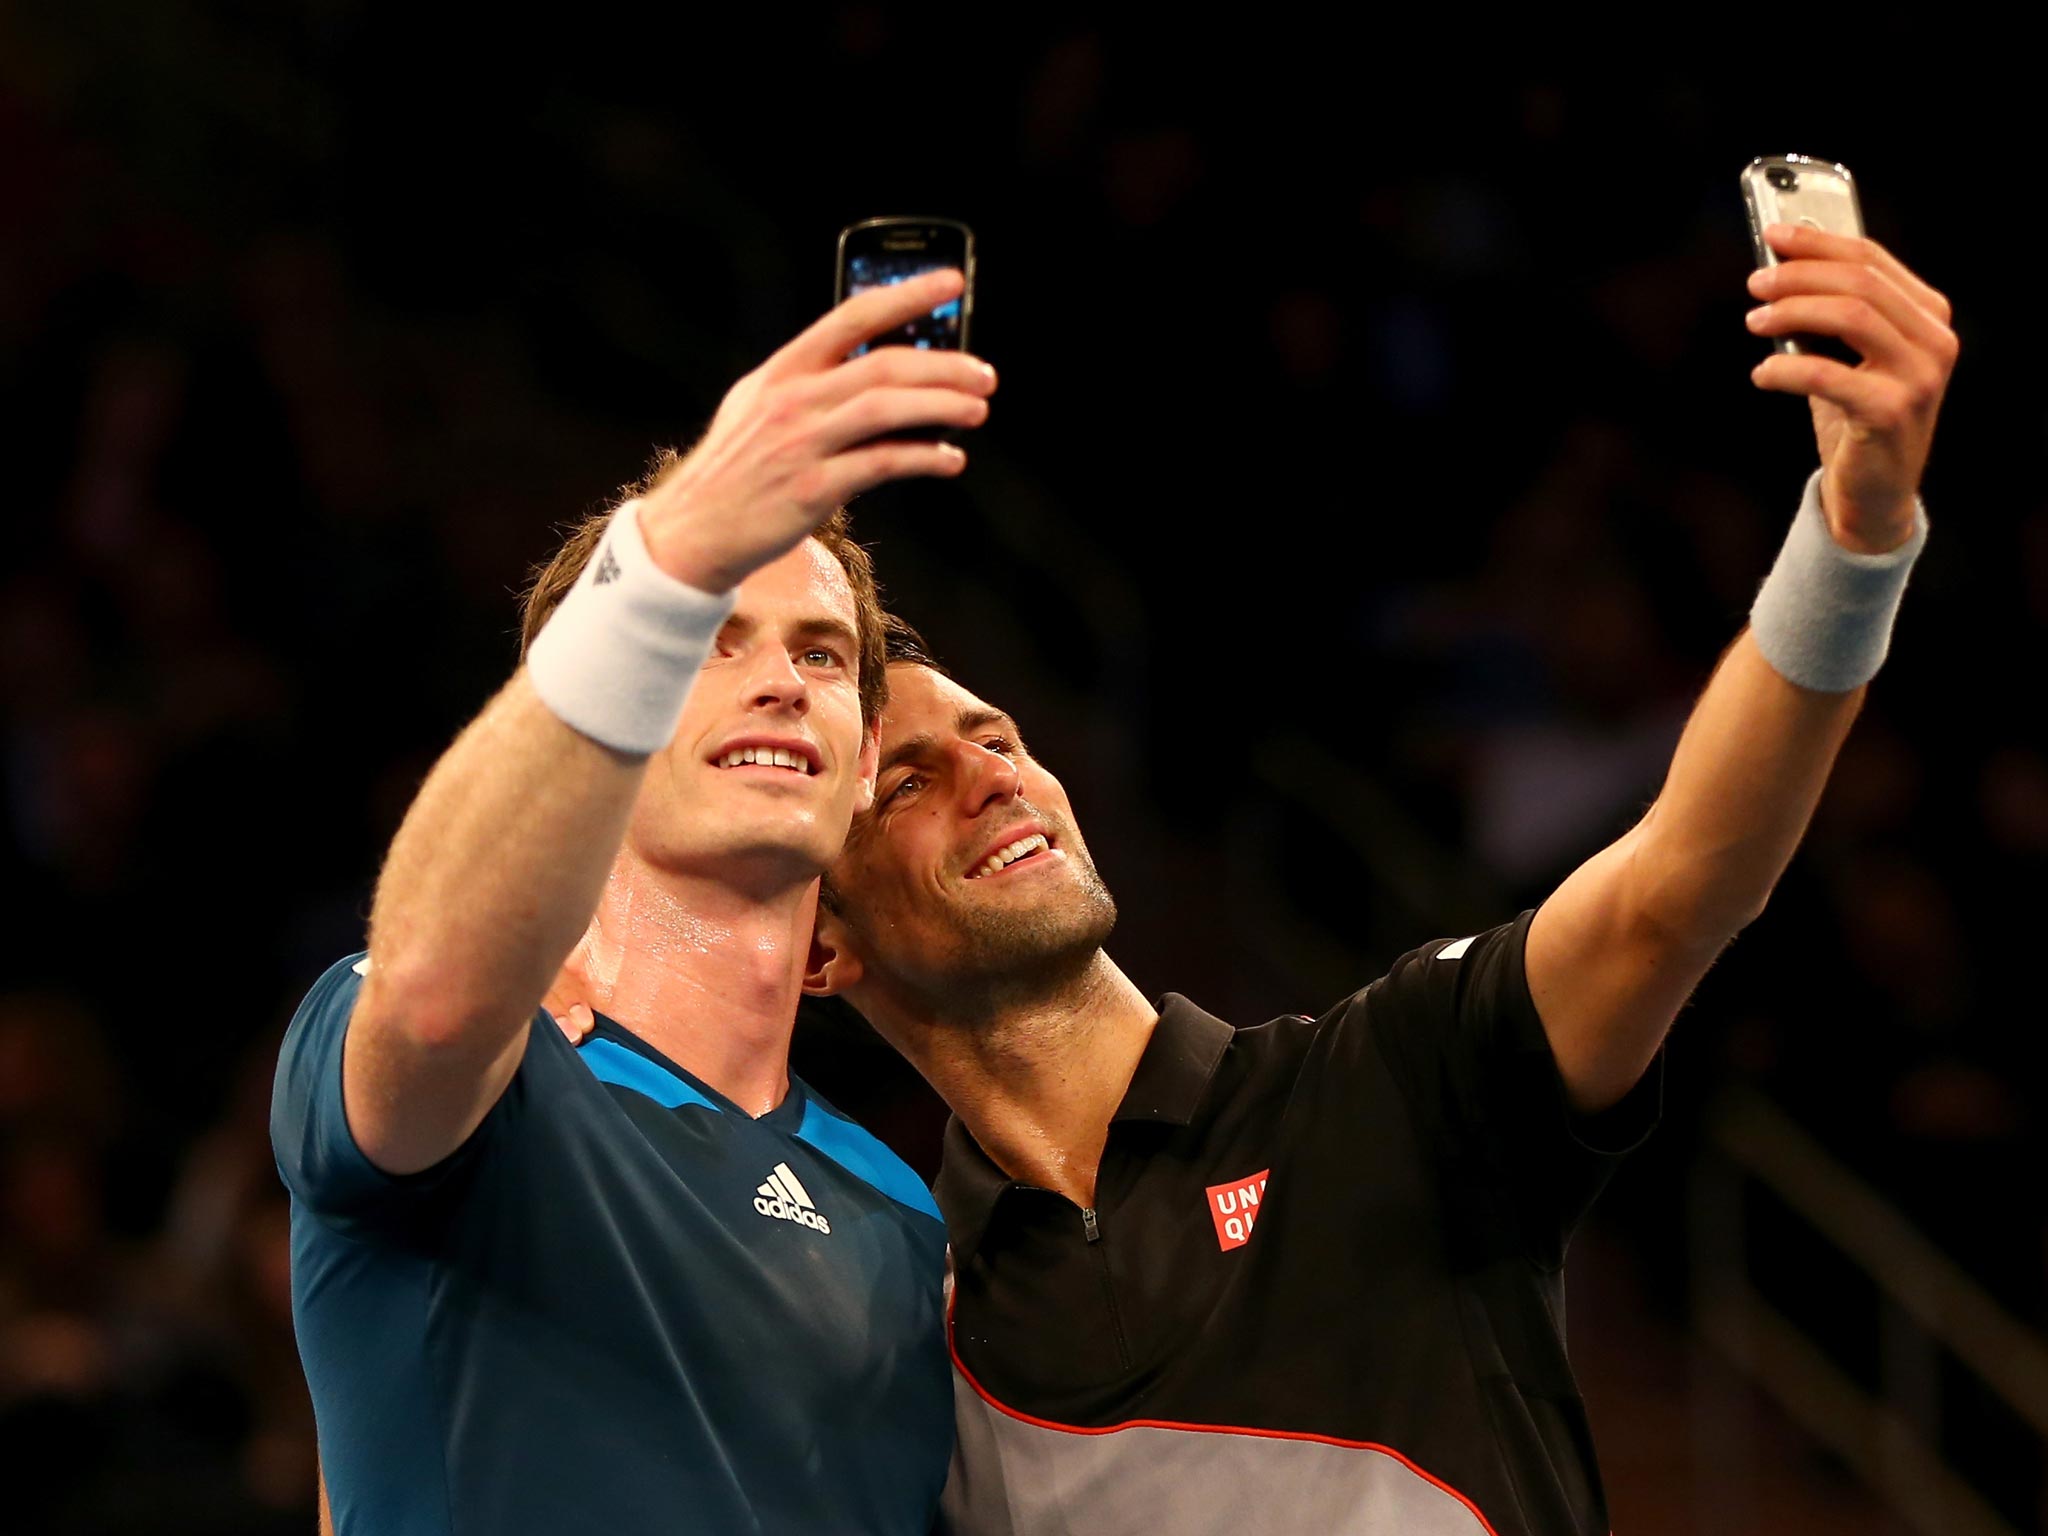 Andy Murray and Novak Djokovic stop during their exhibition match at Madison Square Garden to take a selfie